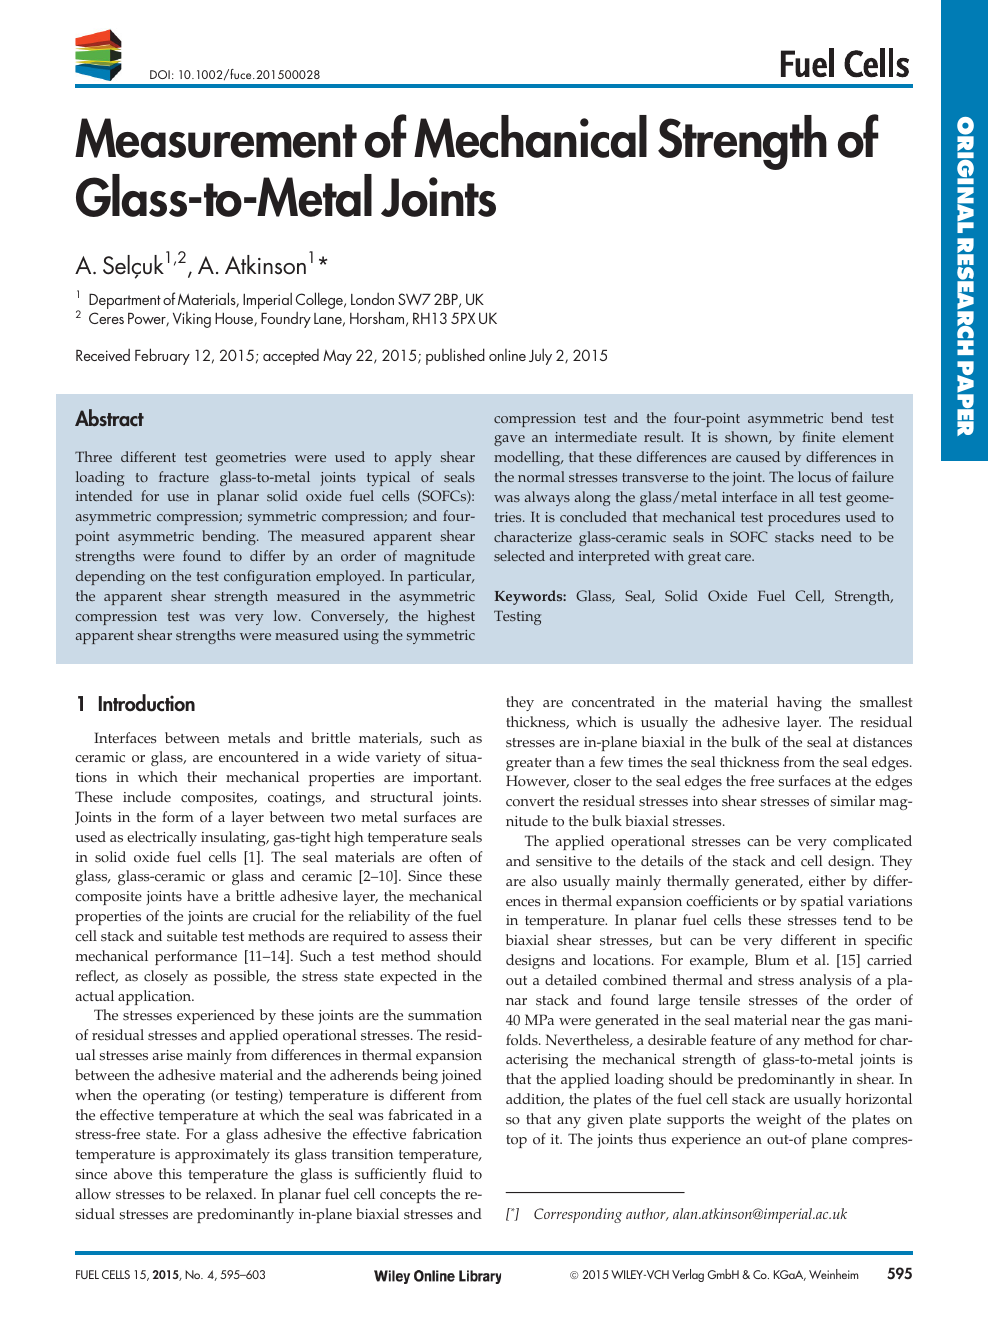 Measurement Of Mechanical Strength Of Glass To Metal Joints Topic Of Research Paper In Mechanical Engineering Download Scholarly Article Pdf And Read For Free On Cyberleninka Open Science Hub